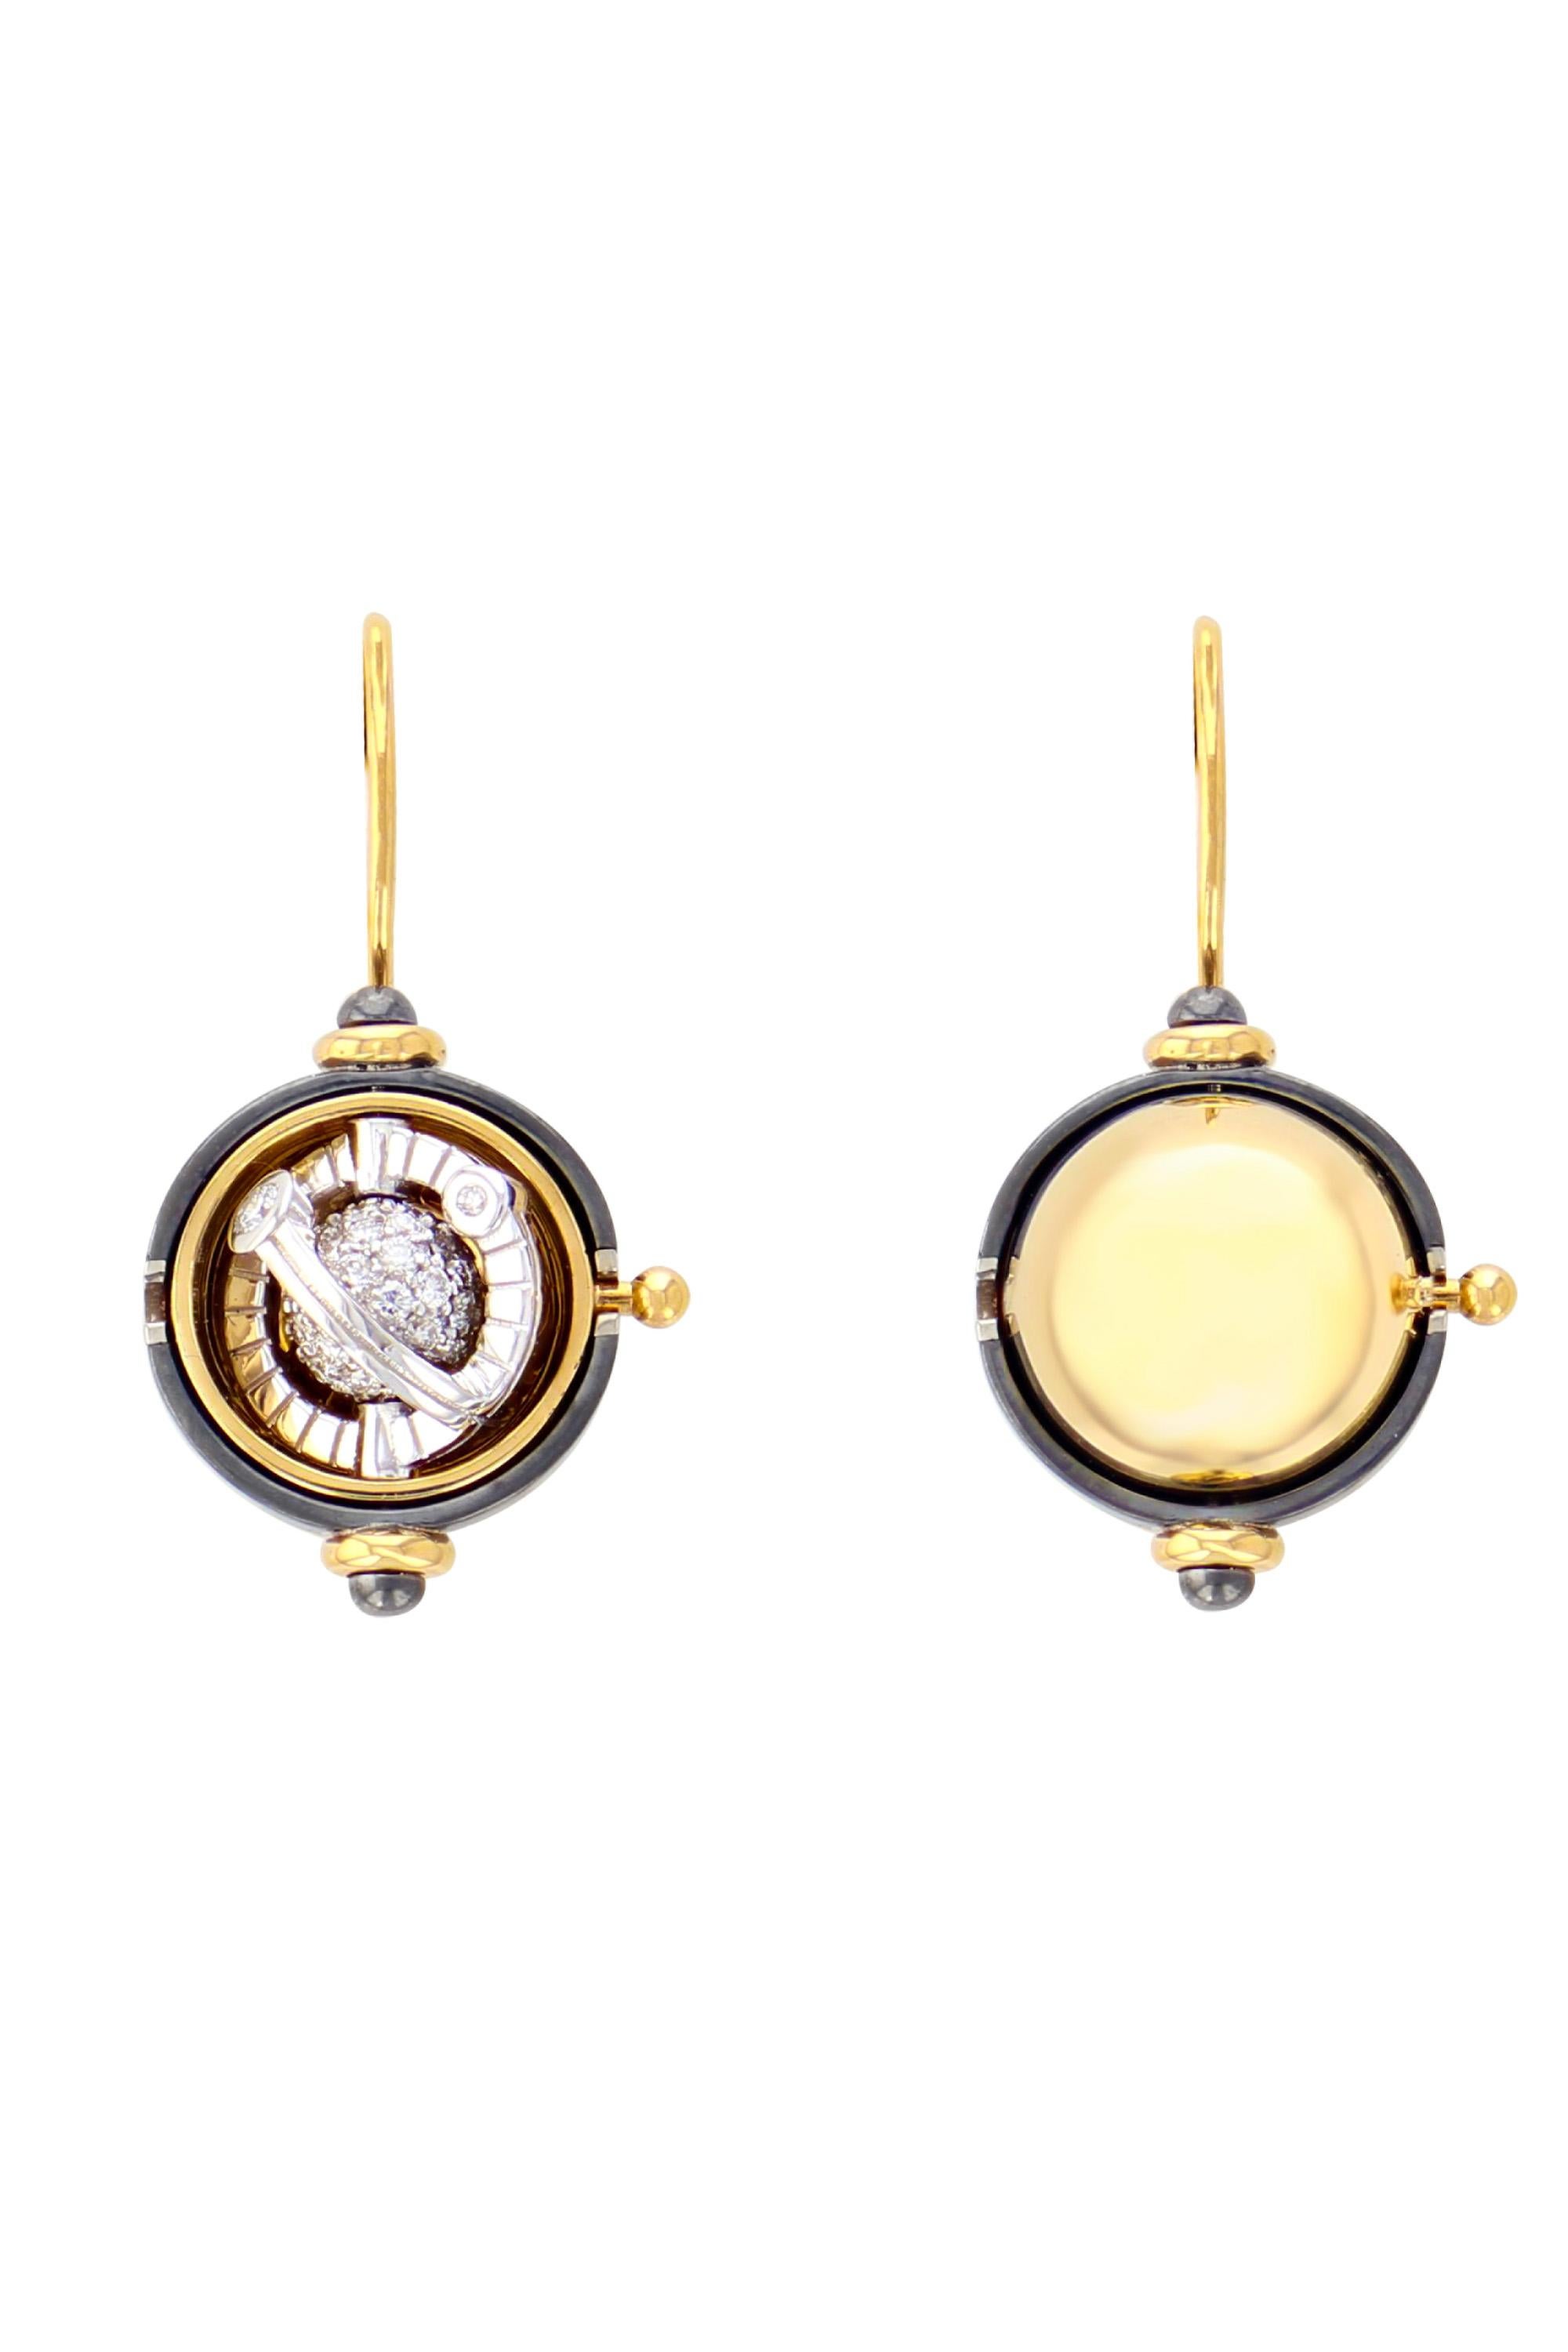 Gold and distressed silver earrings. Rotating sphere revealing a diamond encircled by a white gold ring  set with a diamond.

Details:
Diamonds: 0.9 cts
18k Yellow Gold: 12 g
Distressed Silver : 7 g
Made in France